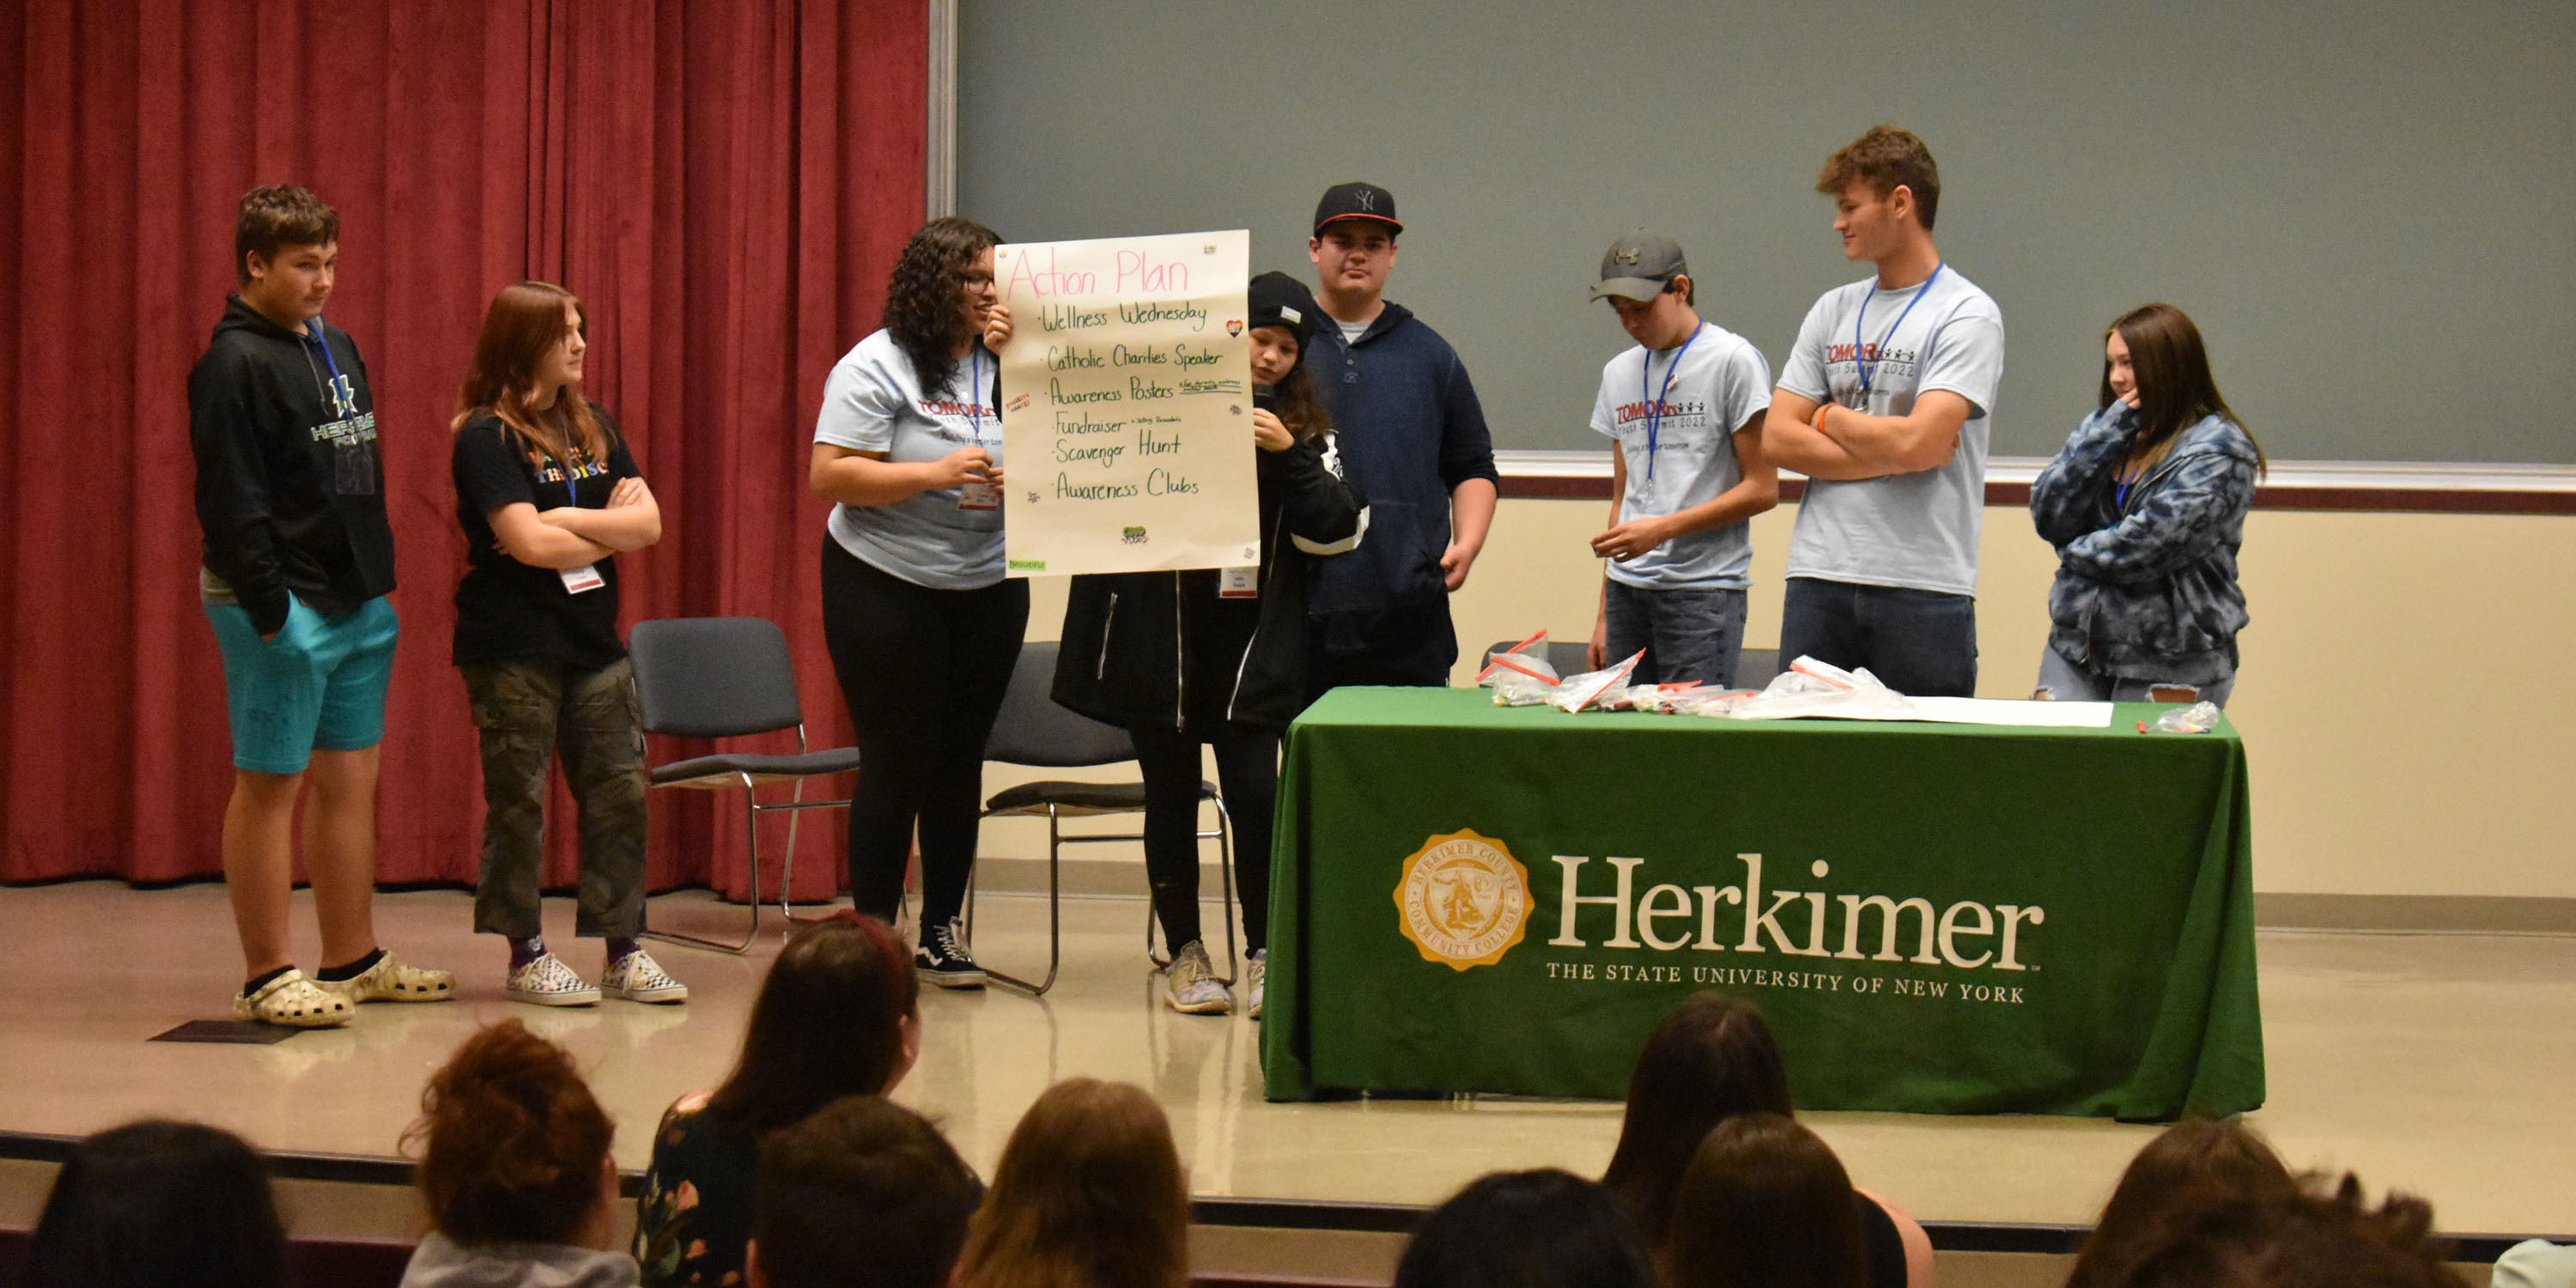 VP-TECH students presenting on stage during the Youth Summit at Herkimer College